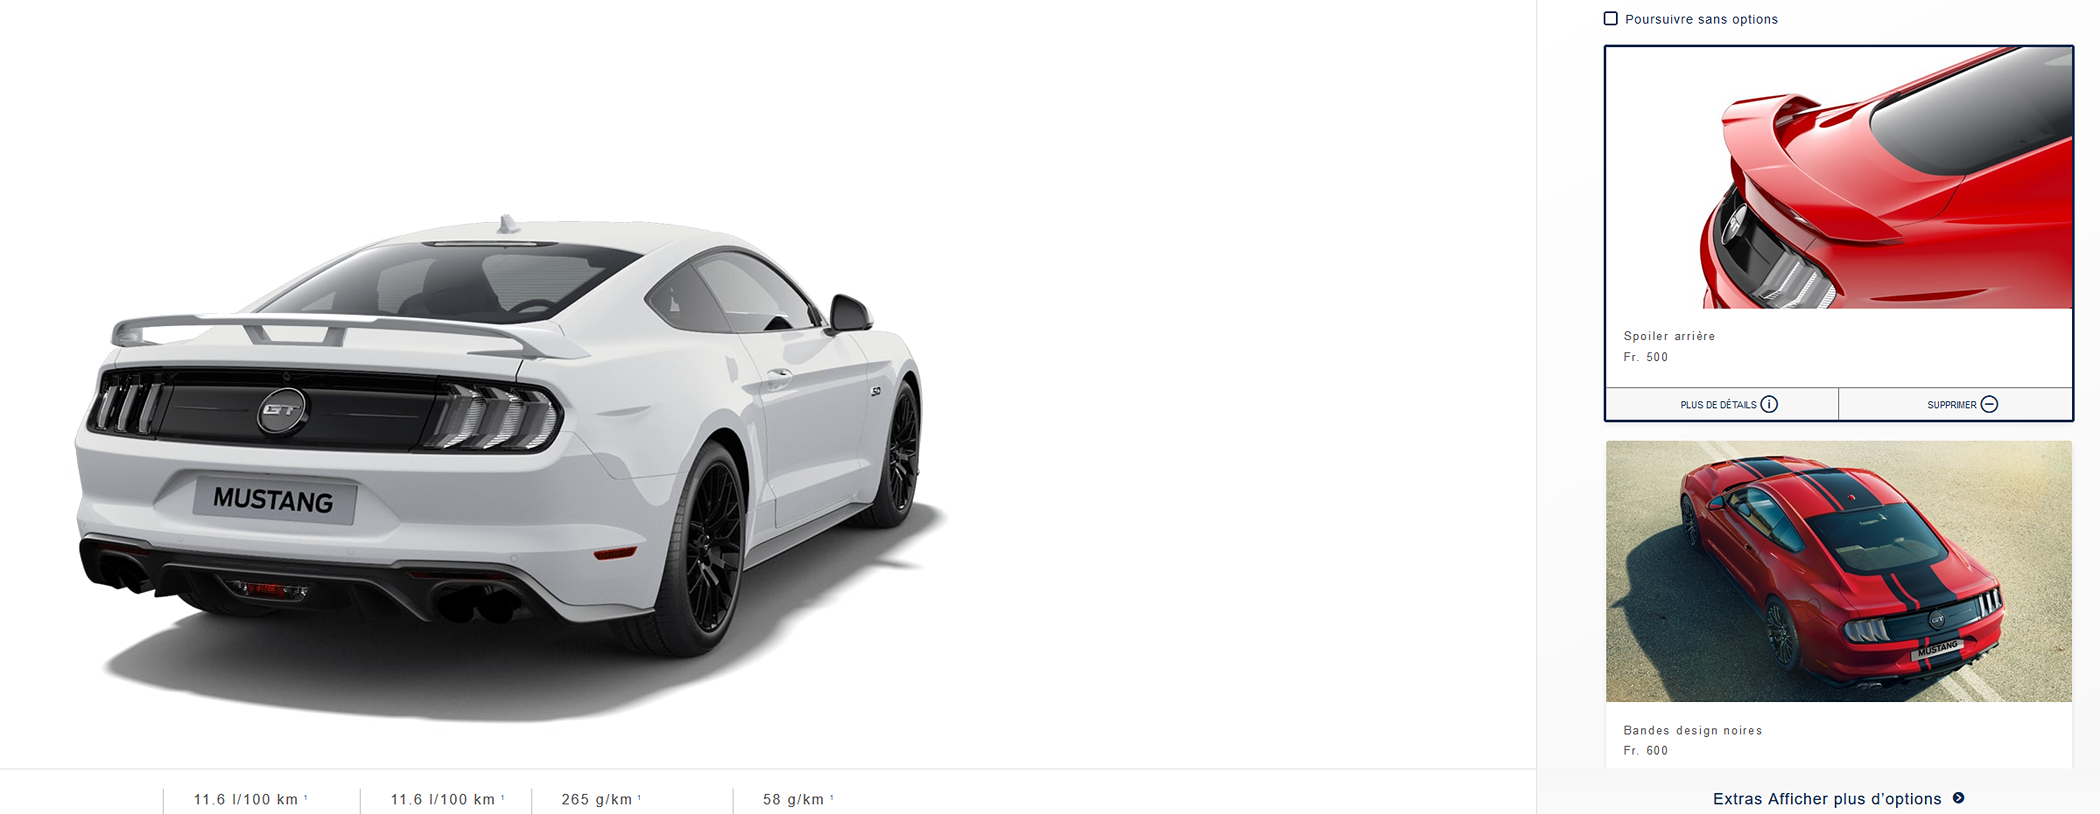 S650 Mustang Spoiler for DH in Europe 1713950316176-7h